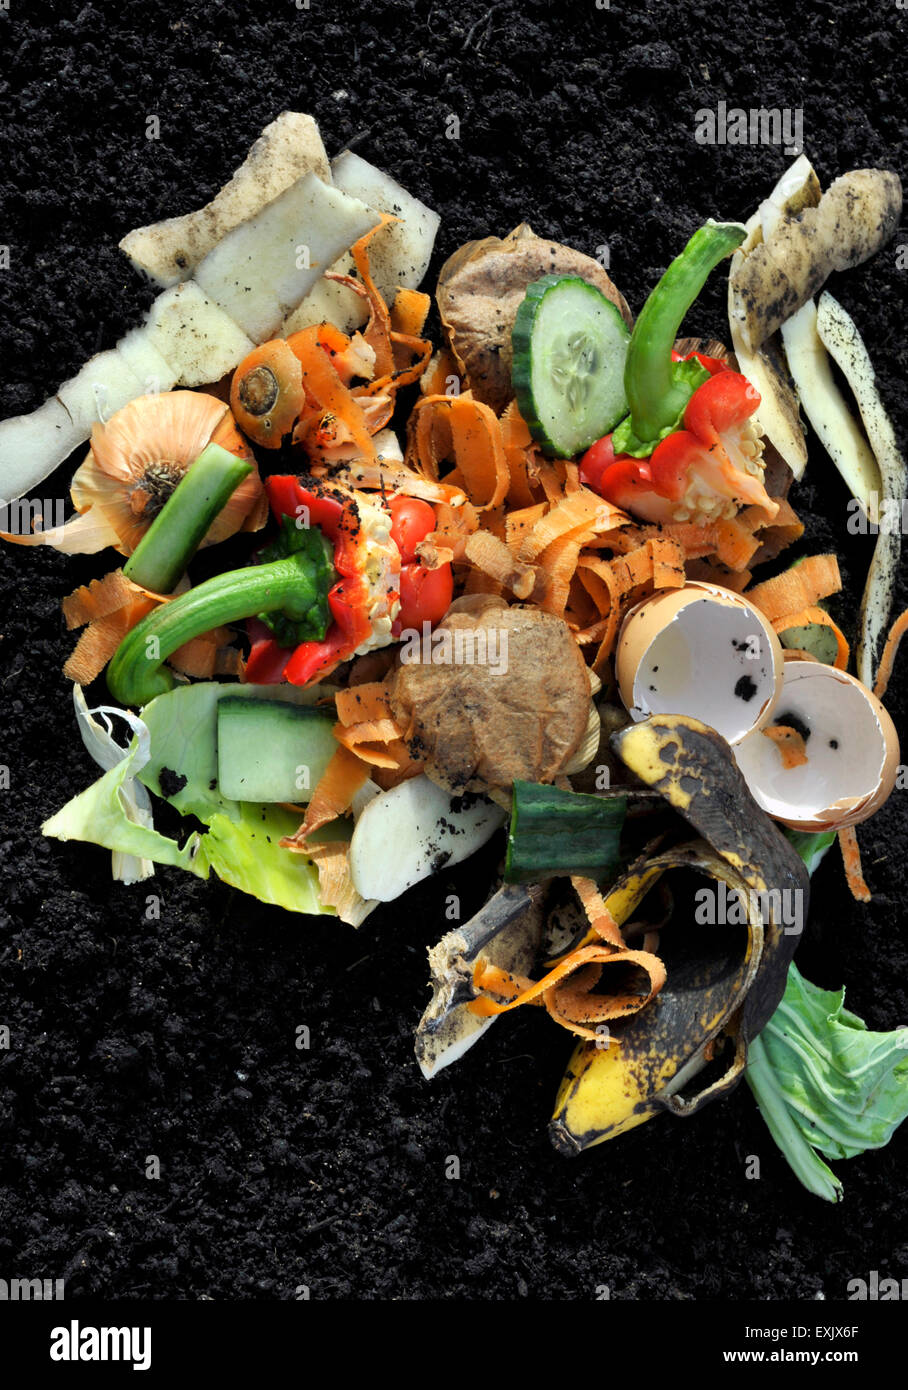 https://c8.alamy.com/comp/EXJX6F/kitchen-household-vegetable-waste-recycling-EXJX6F.jpg